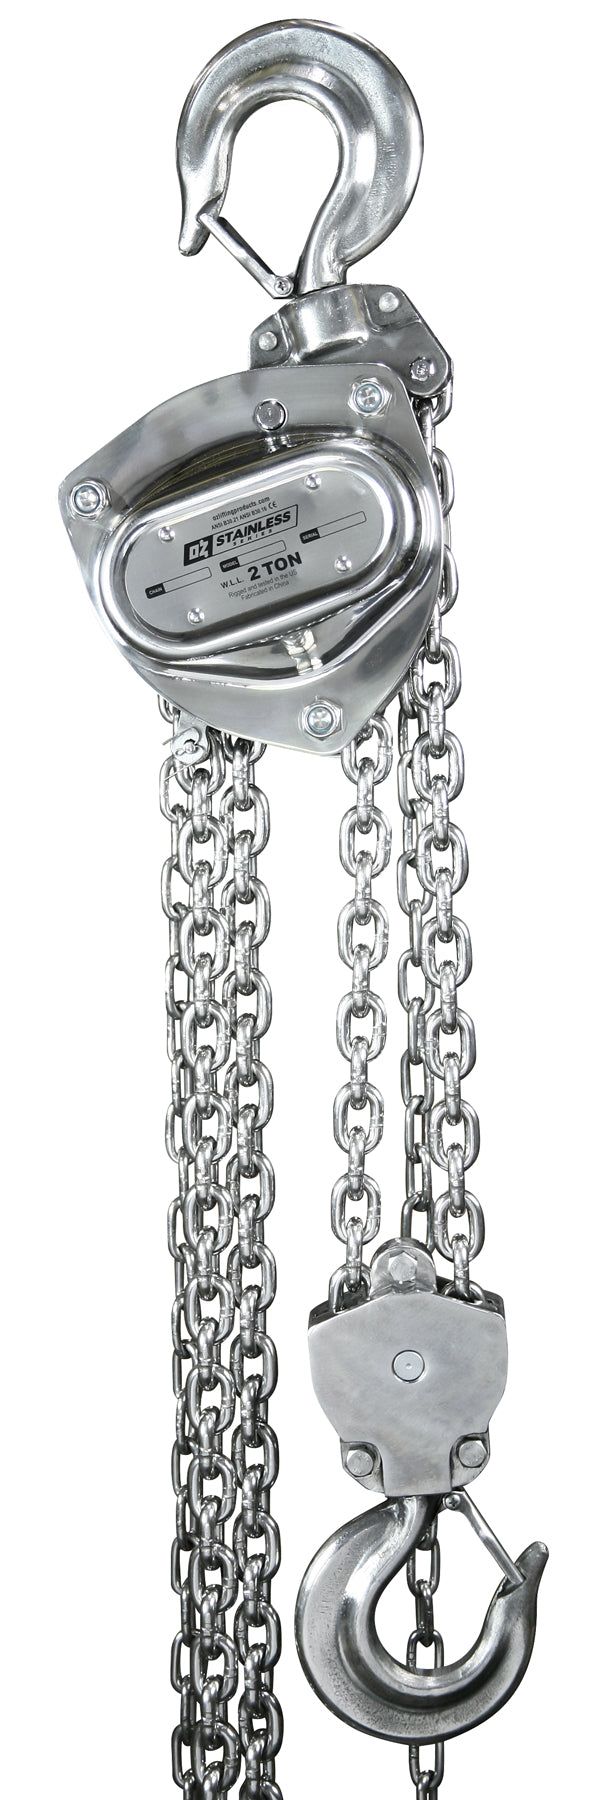 OZ Lifting Stainless Steel Manual Chain Hoist